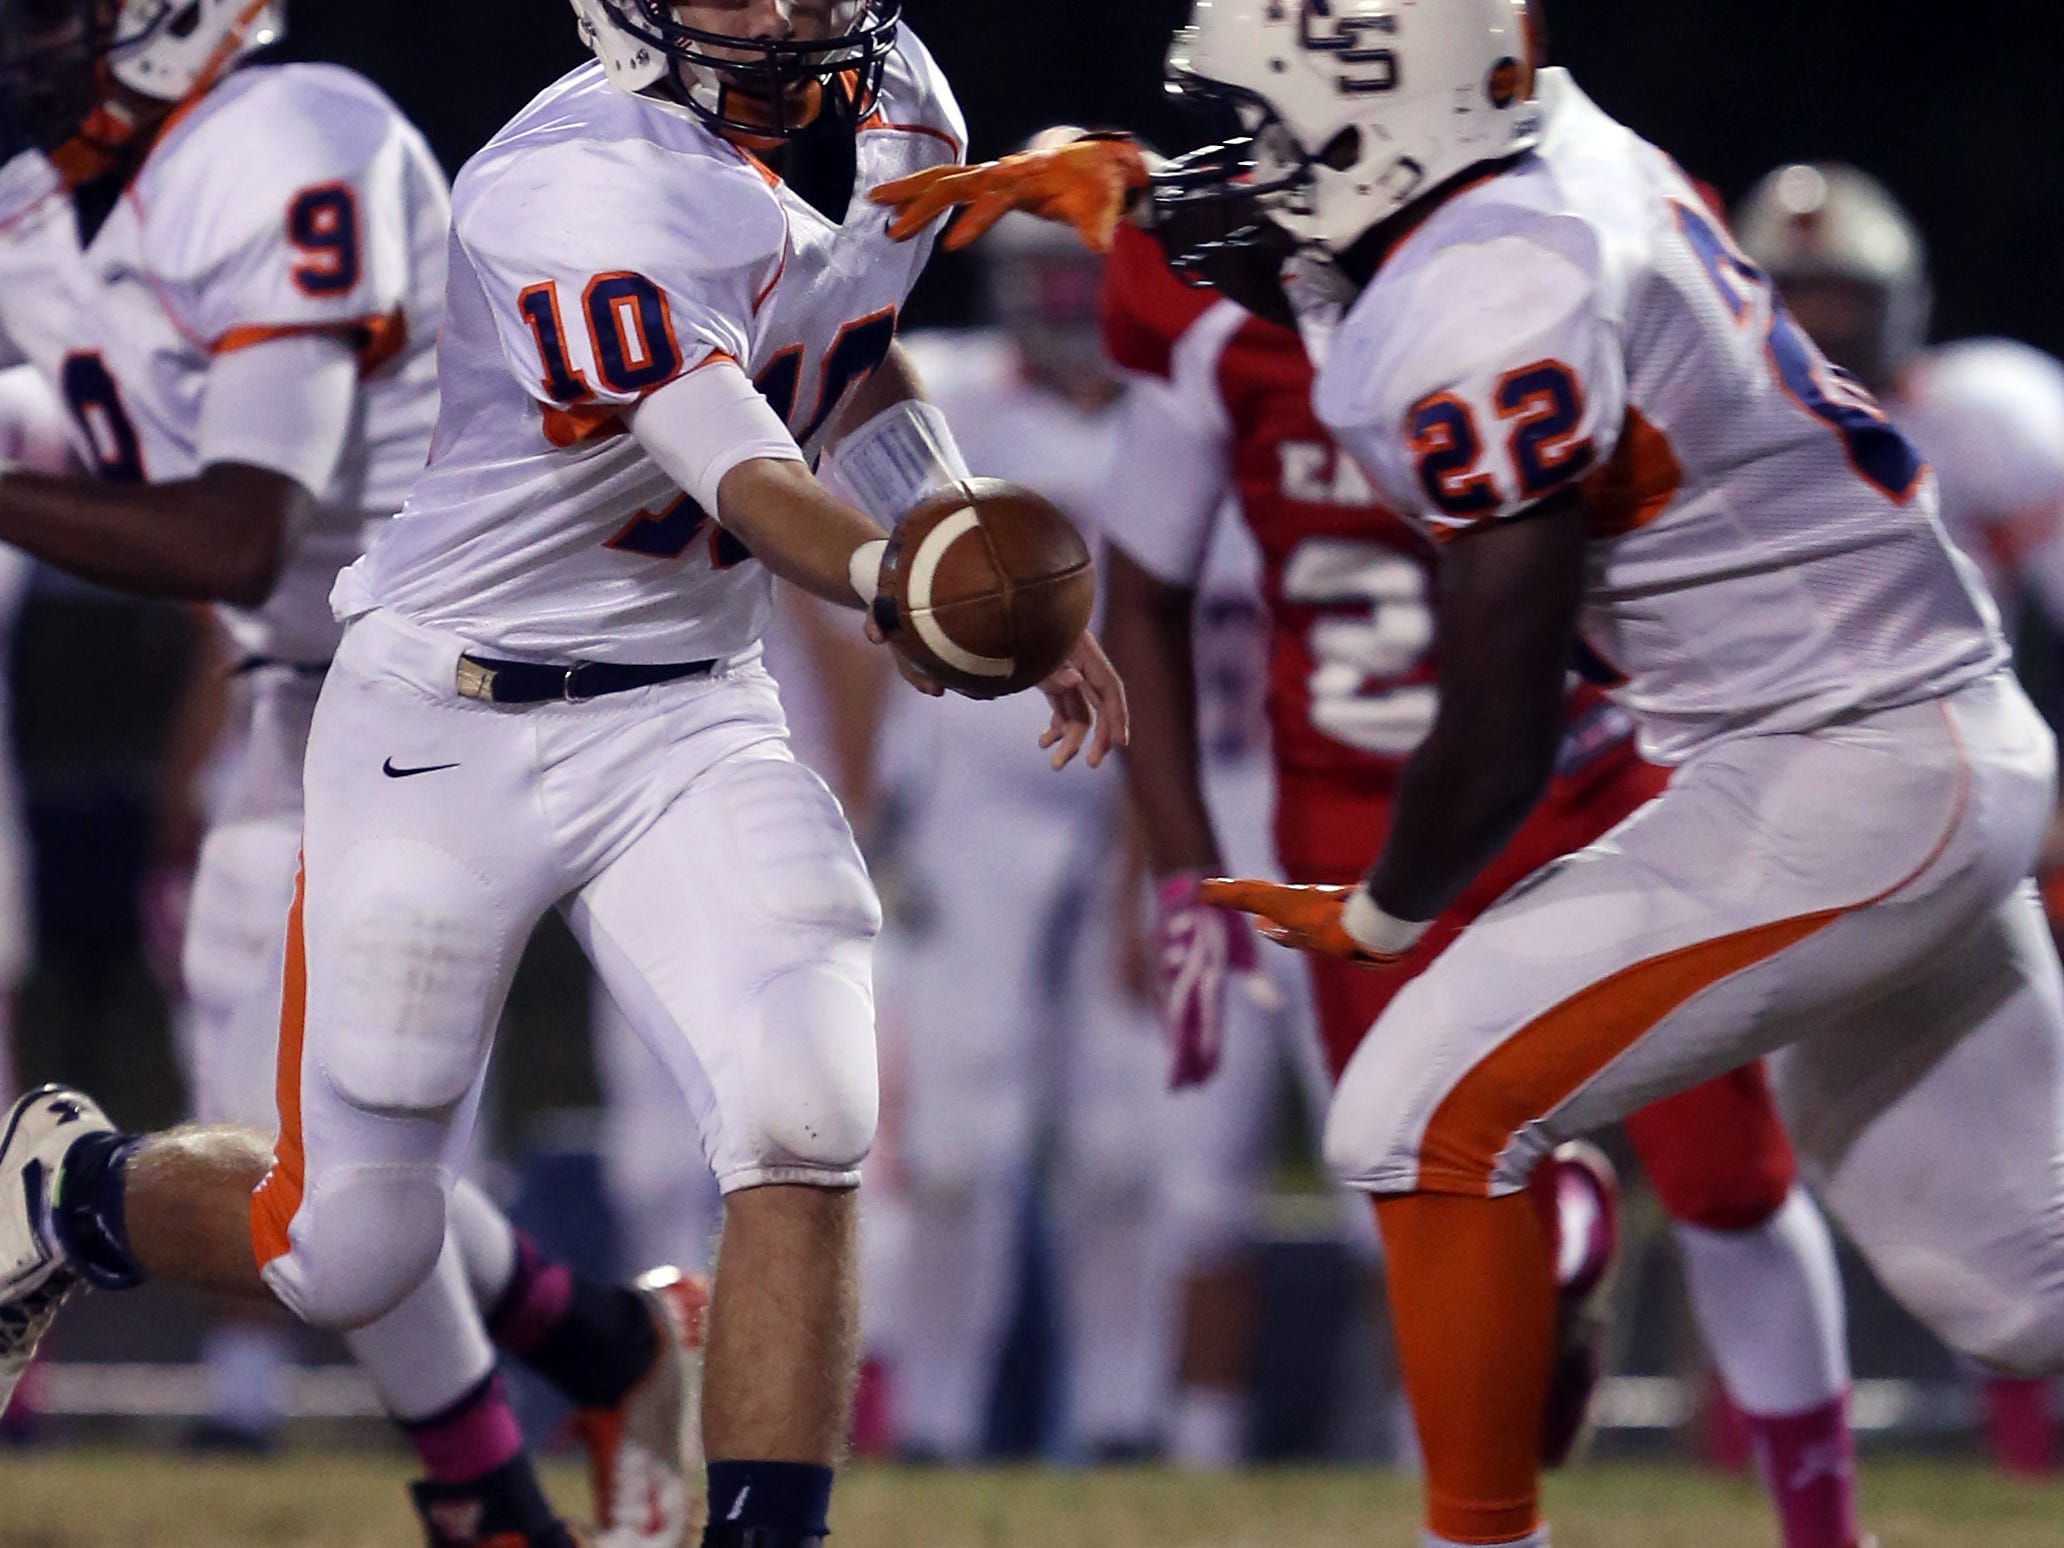 Nashville Christian quarterback Kyle Tidwell hands the ball to Blake Barfield during their game against East Nashville at Tennessee Preparatory School Friday Oct. 24, 2014, in Nashville, Tenn.